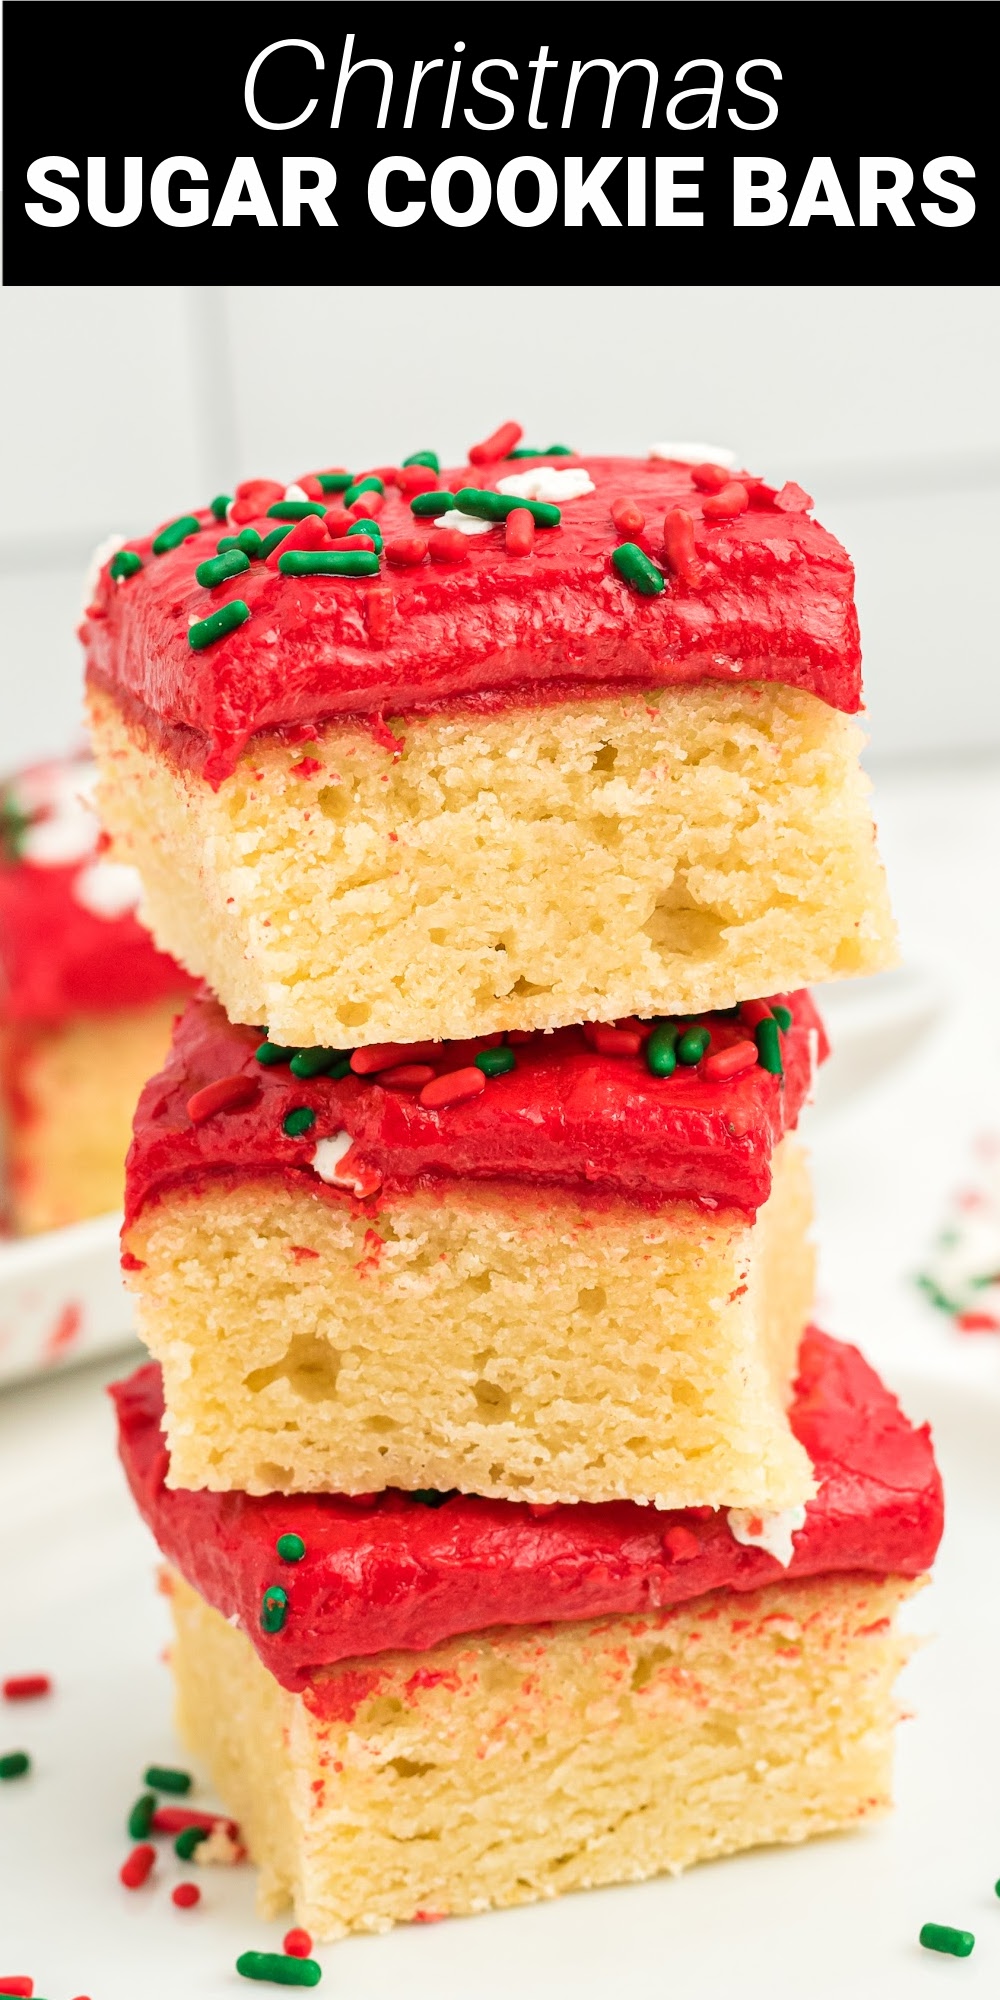 Christmas sugar cookie bars are an easy way to make colorful Christmas sugar cookies with all the work. These buttery sugar cookie bars are thick and delicious topped with a sweet buttercream frosting and Christmas sprinkles.